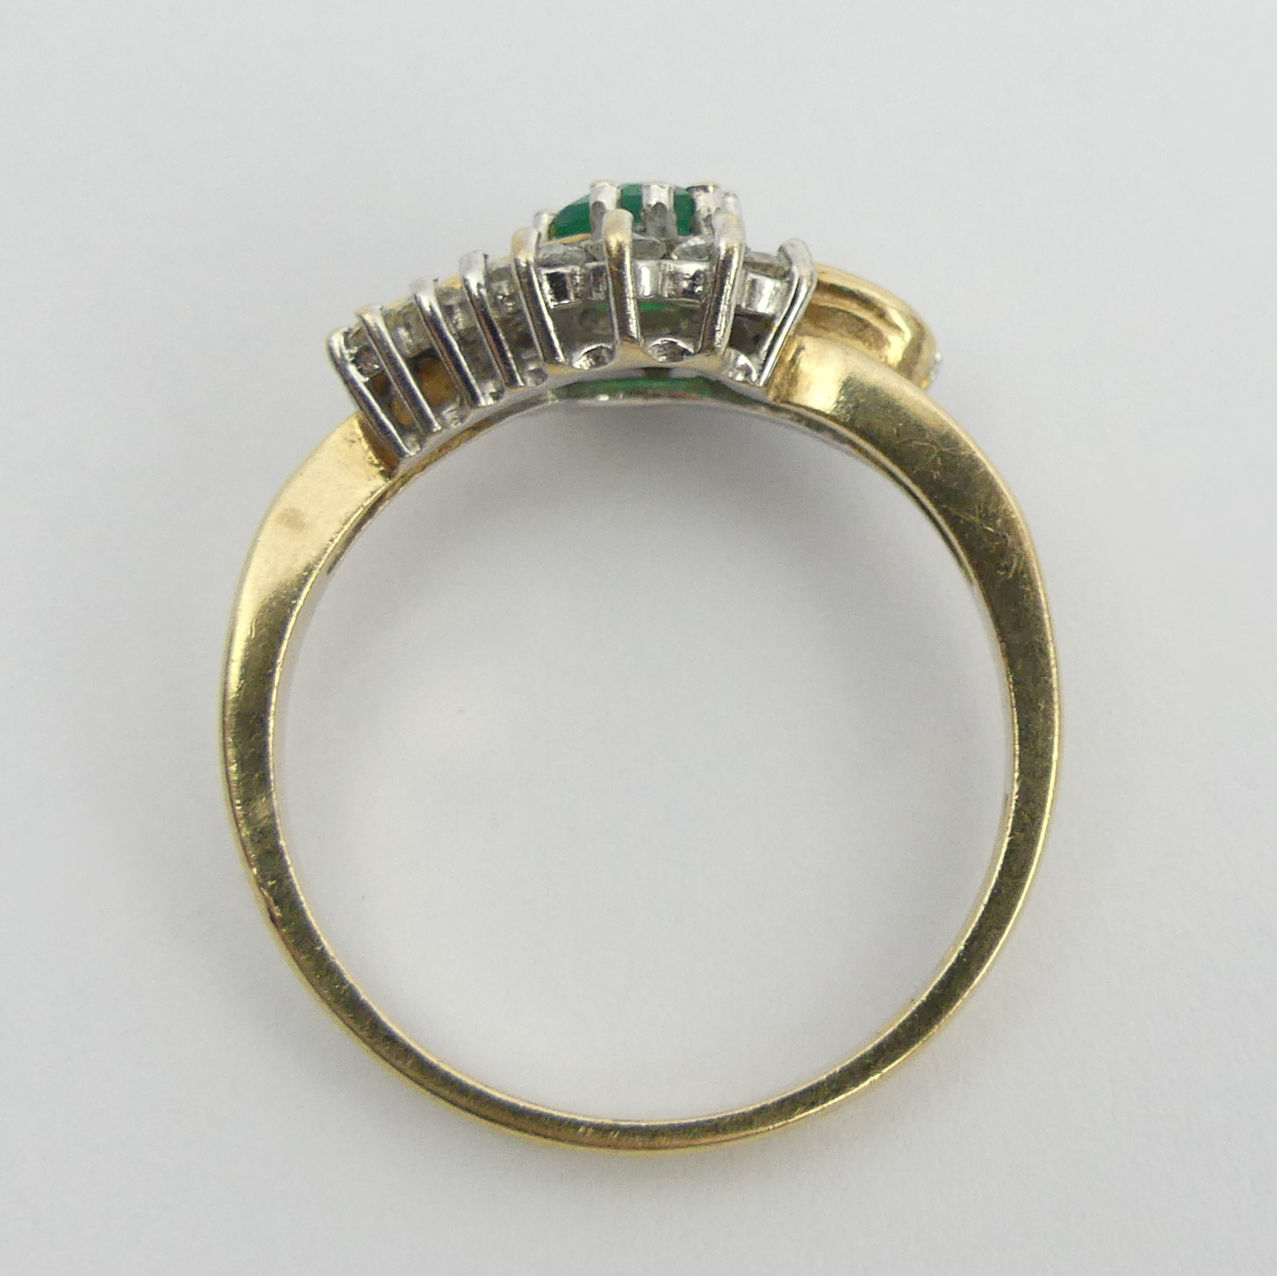 9ct gold green and white stone ring, 2.6 grams. Size P, 9 mm wide. UK Postage £12. - Image 4 of 6